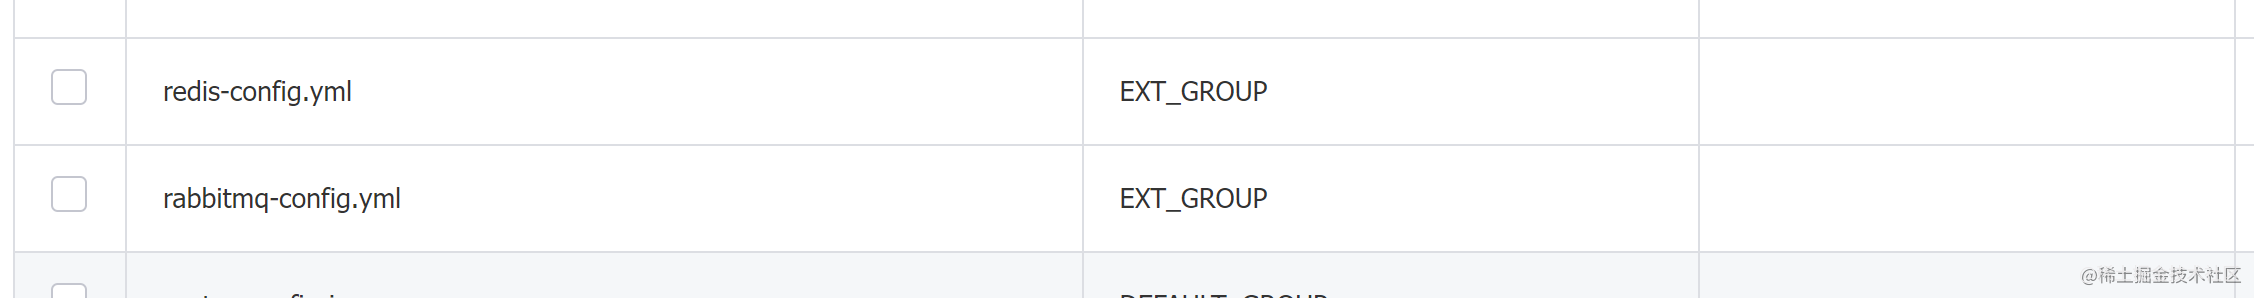 ext_group.png